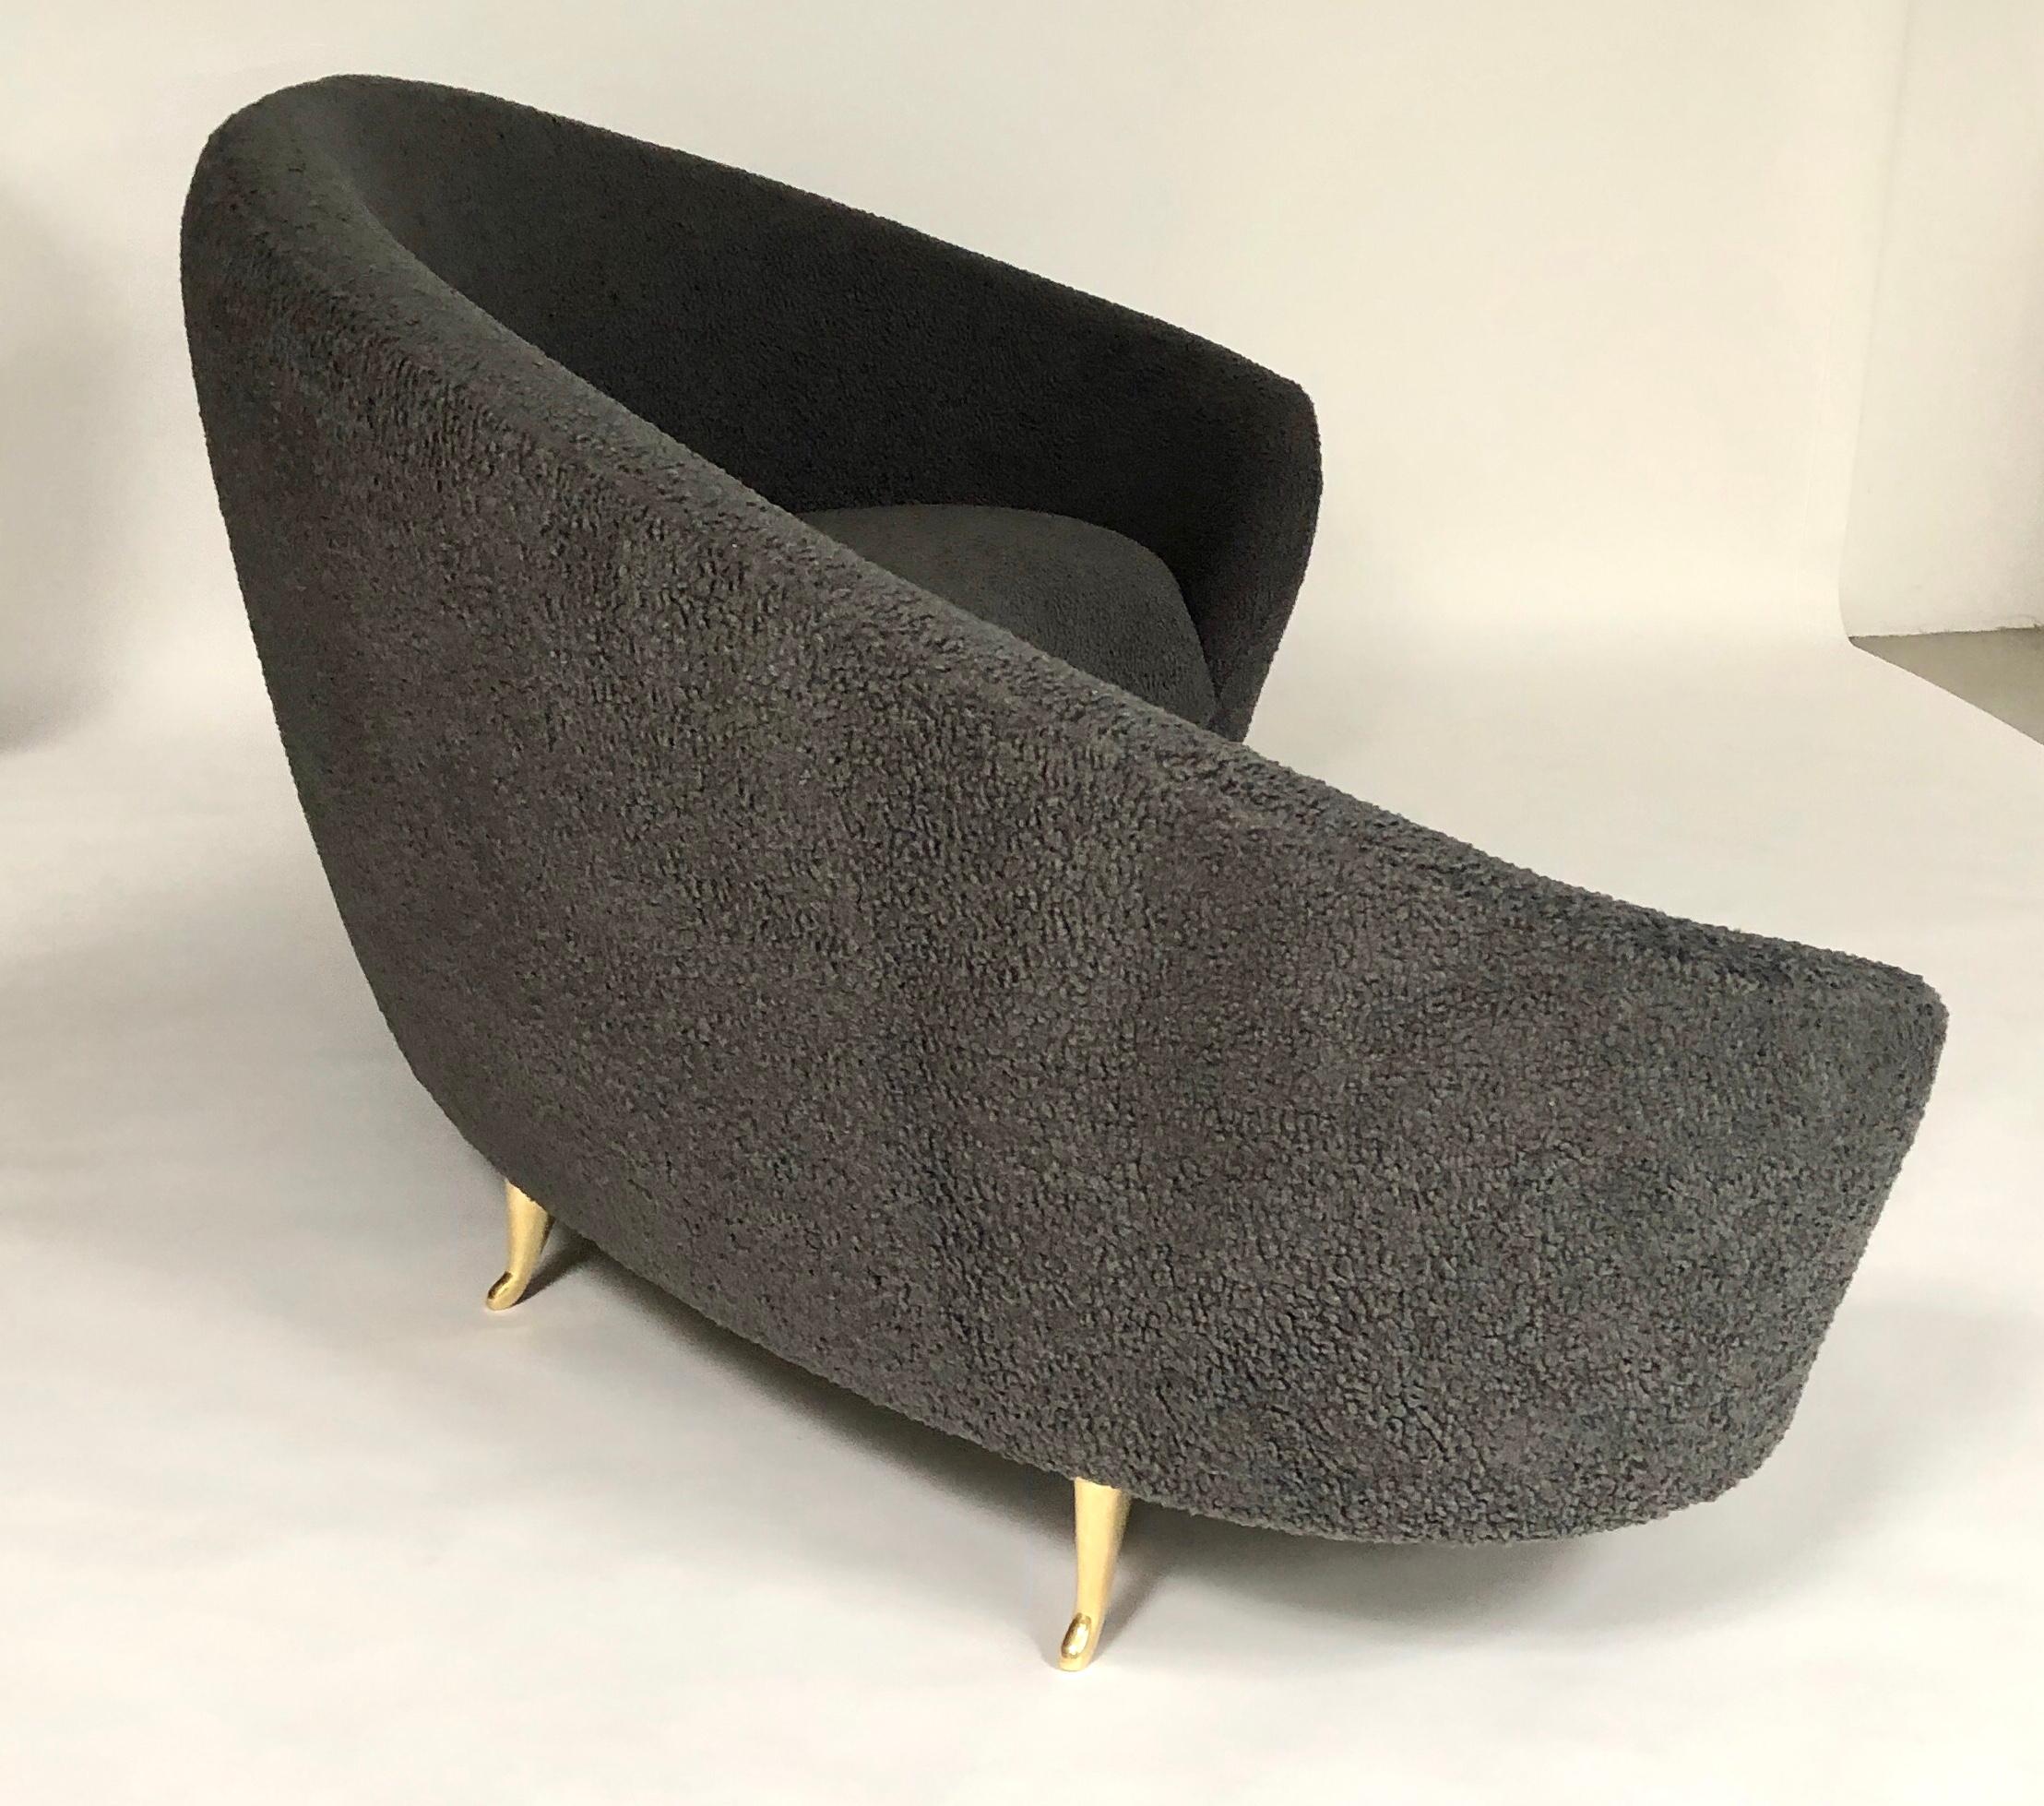 Contemporary Arc Sofa by Bourgeois Boheme Atelier, Charcoal